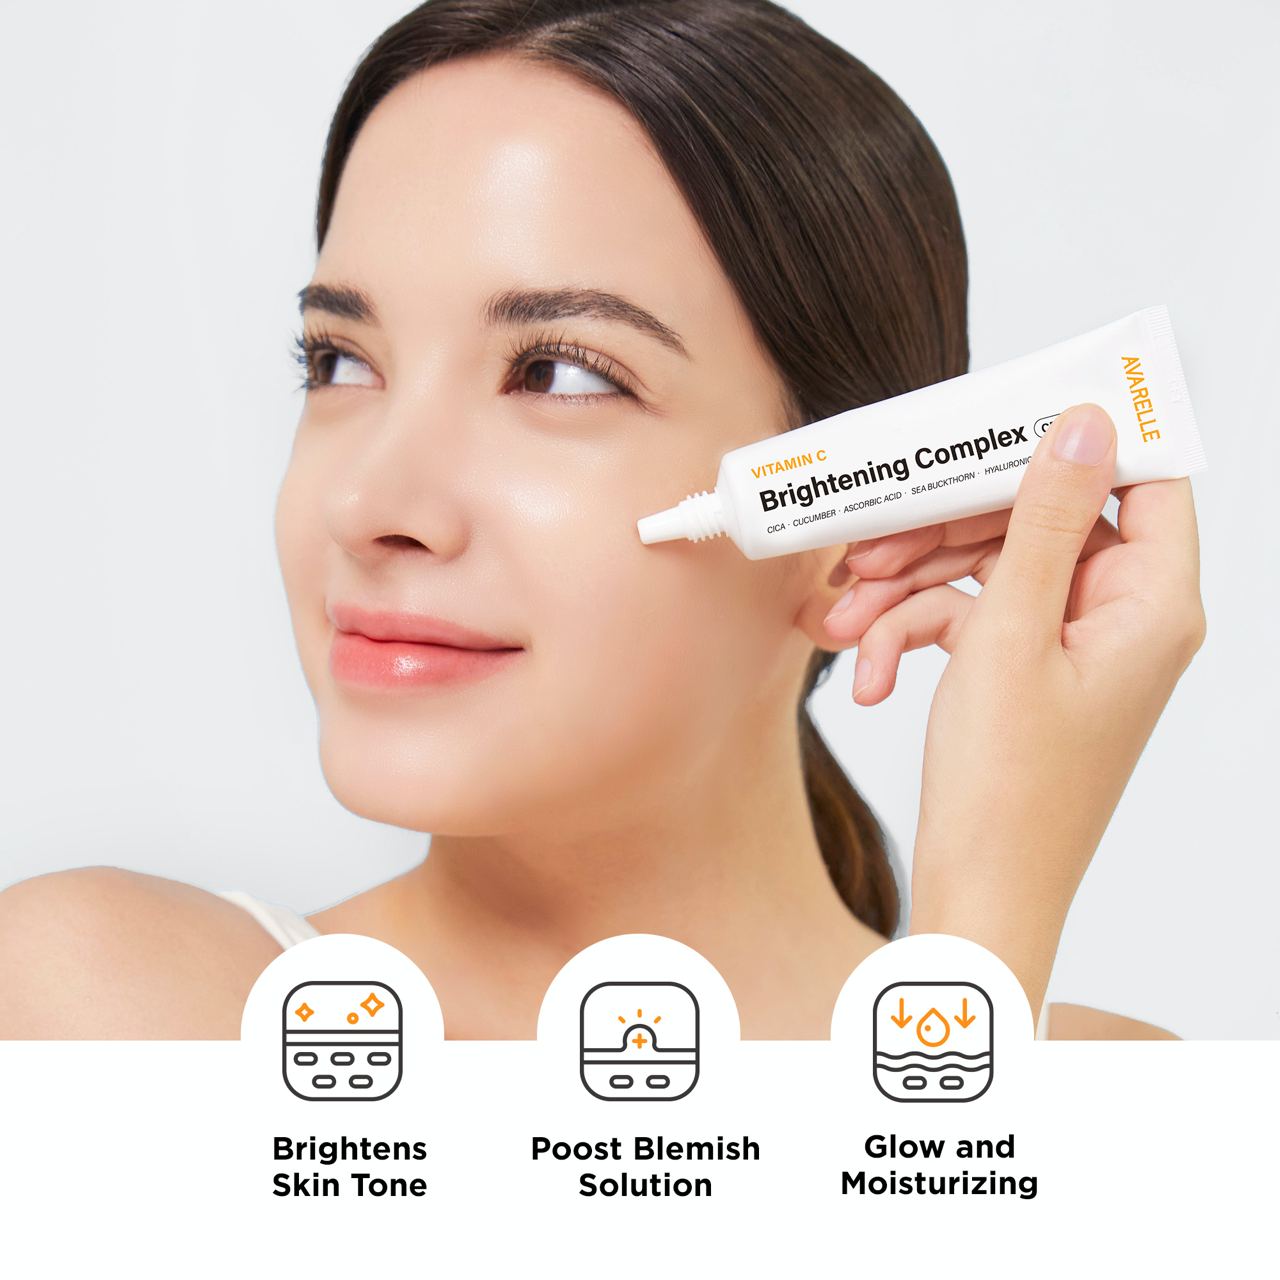 Woman applying Avarelle's Vitamin C Brightening Complex Cream, with icons illustrating the product benefits: brightens skin tone, boosts post blemish solution and provides glow and moisturizing.